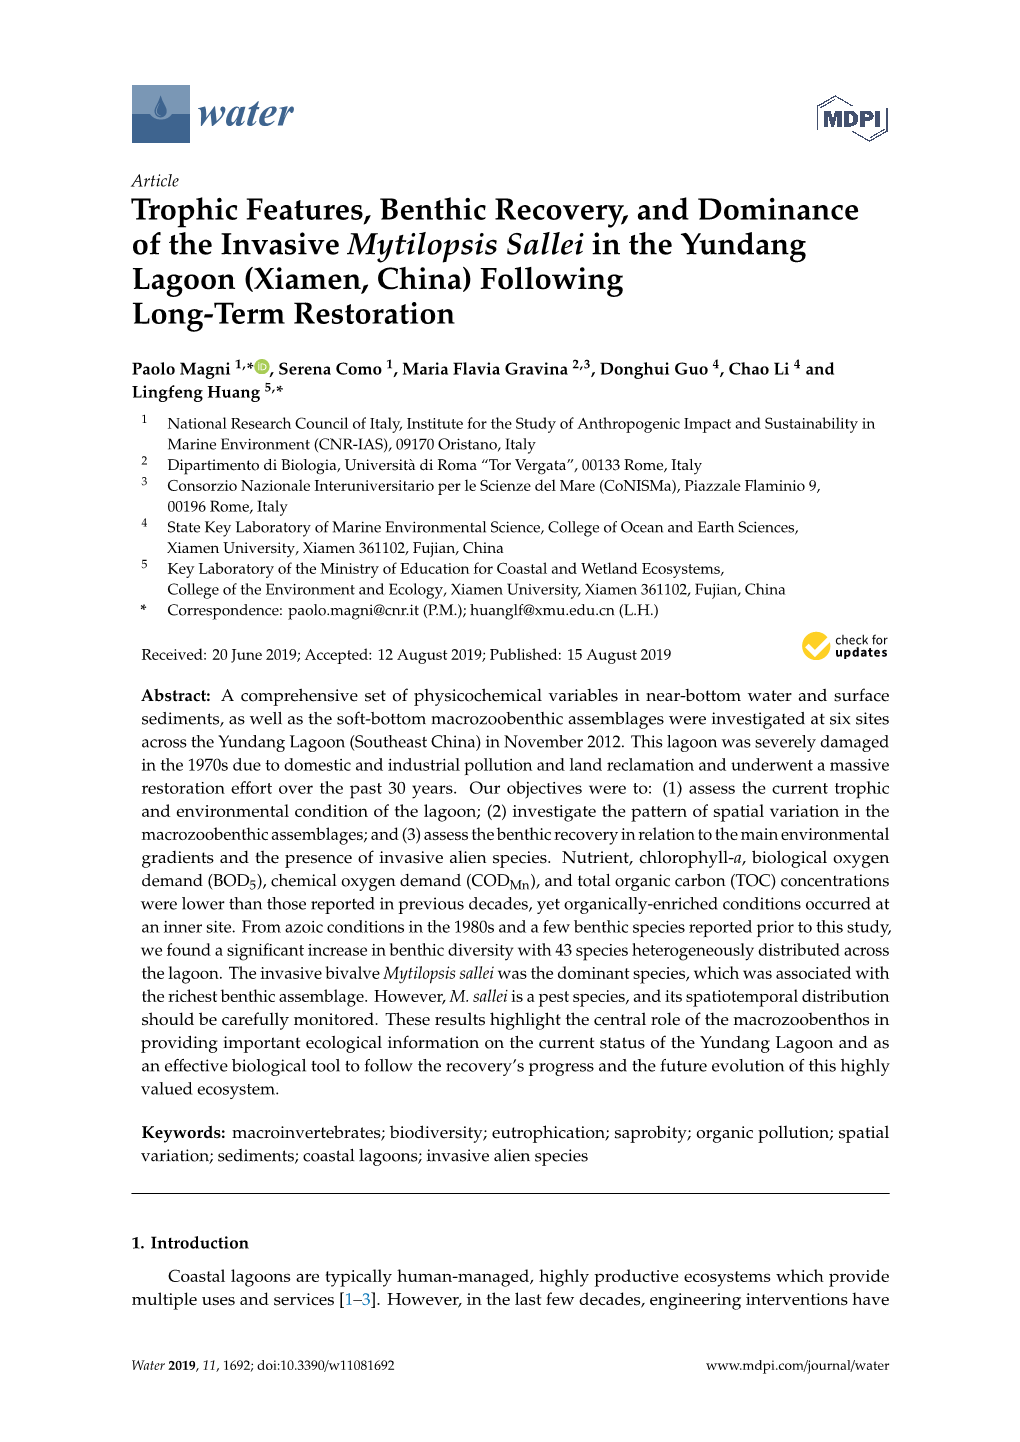 Trophic Features, Benthic Recovery, and Dominance of the Invasive Mytilopsis Sallei in the Yundang Lagoon (Xiamen, China) Following Long-Term Restoration